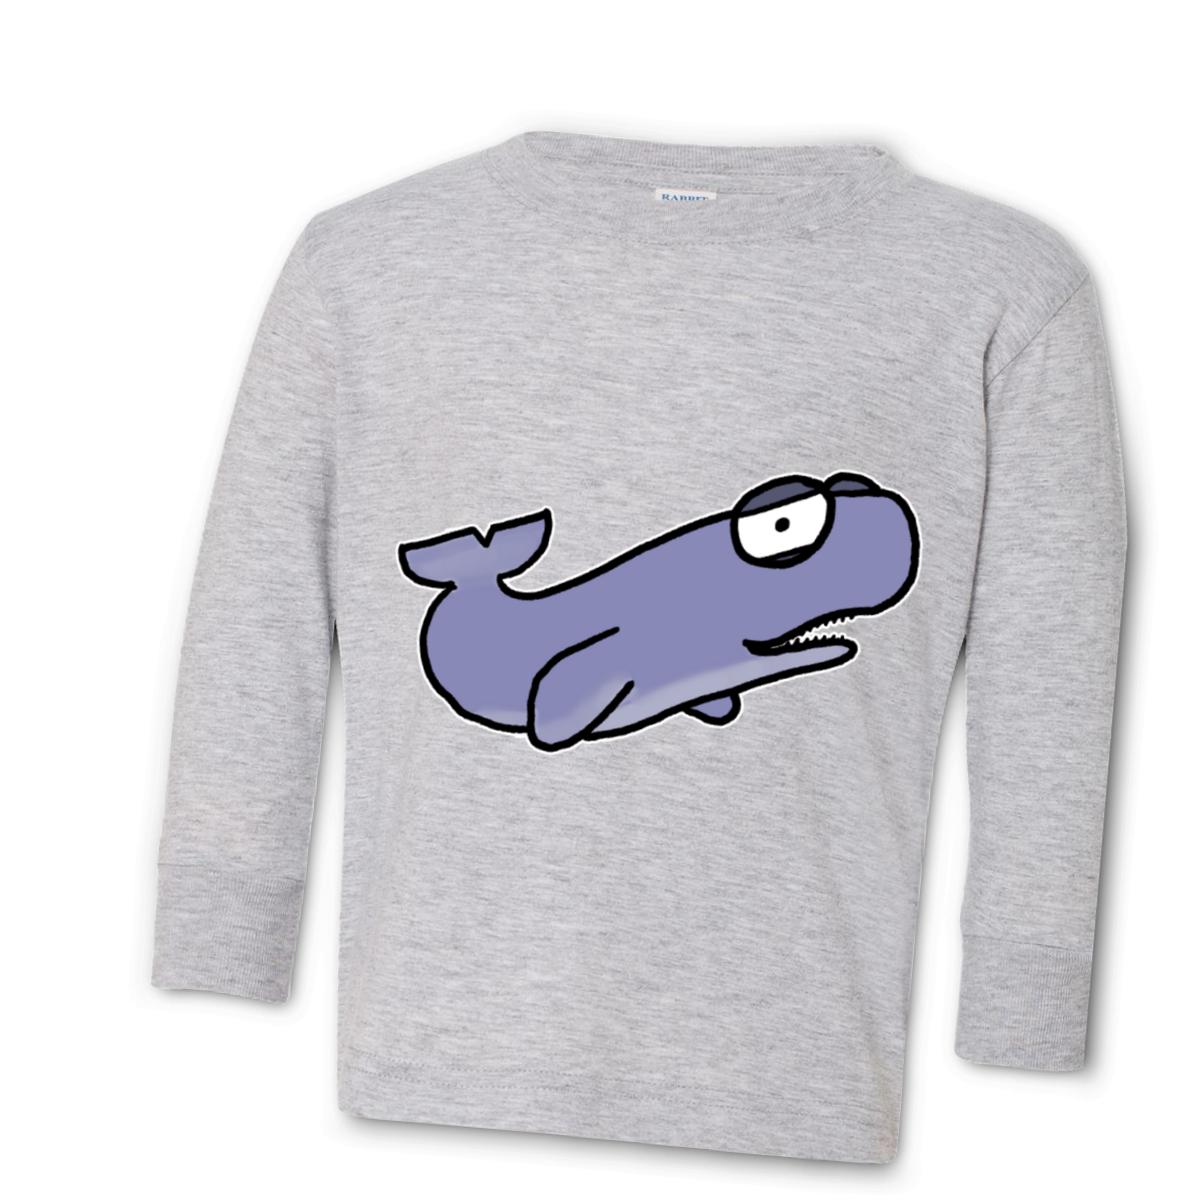 Sperm Whale Toddler Long Sleeve Tee 2T heather